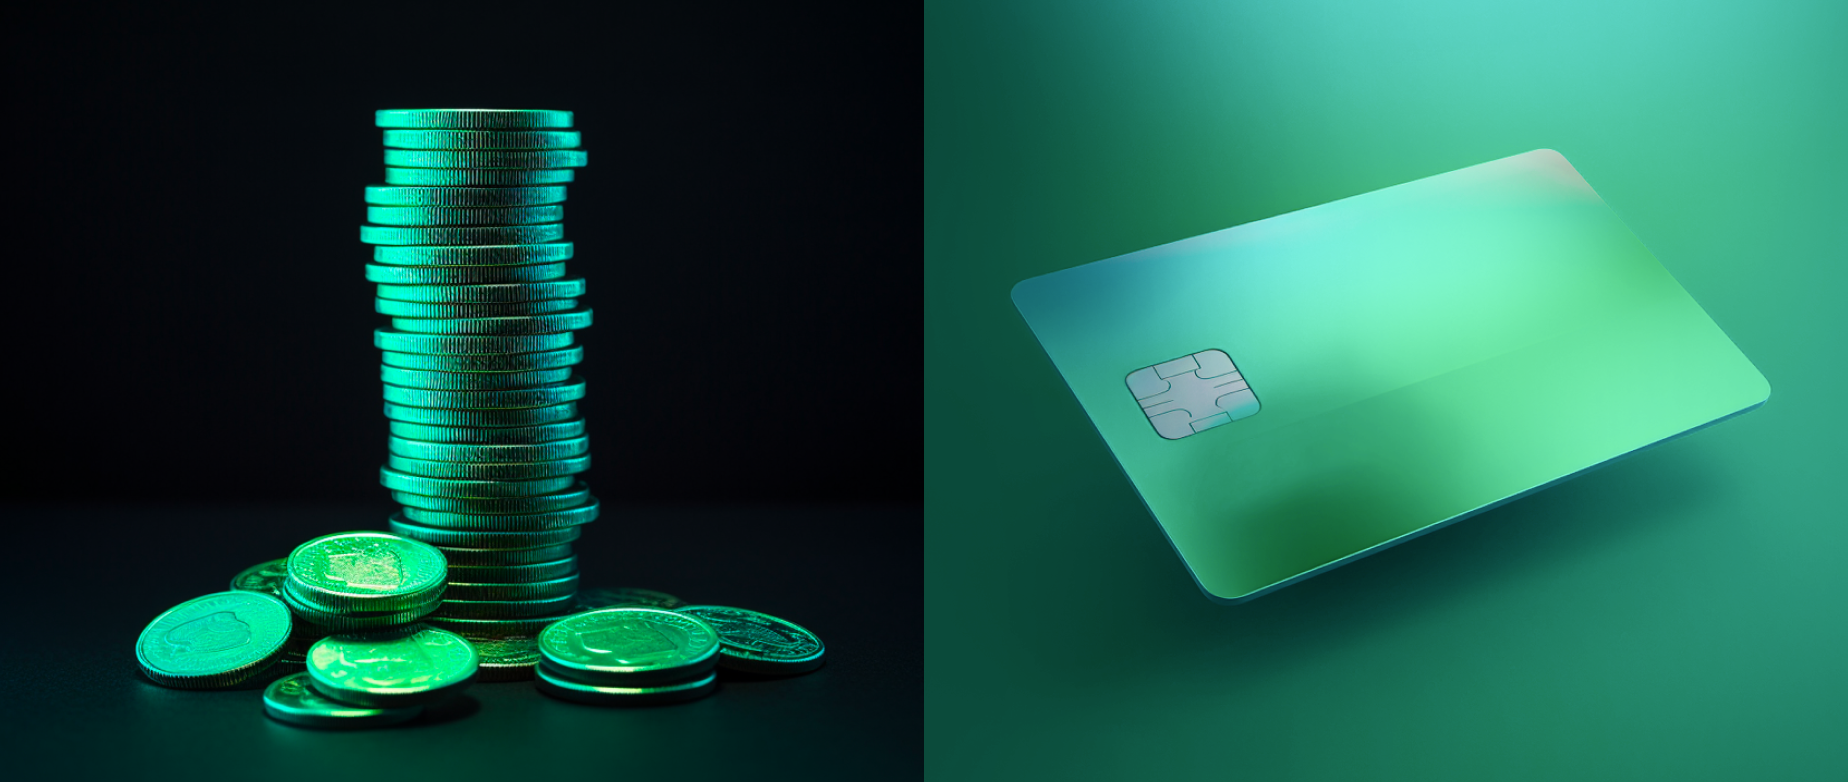 A side by side representation of coins and a credit card